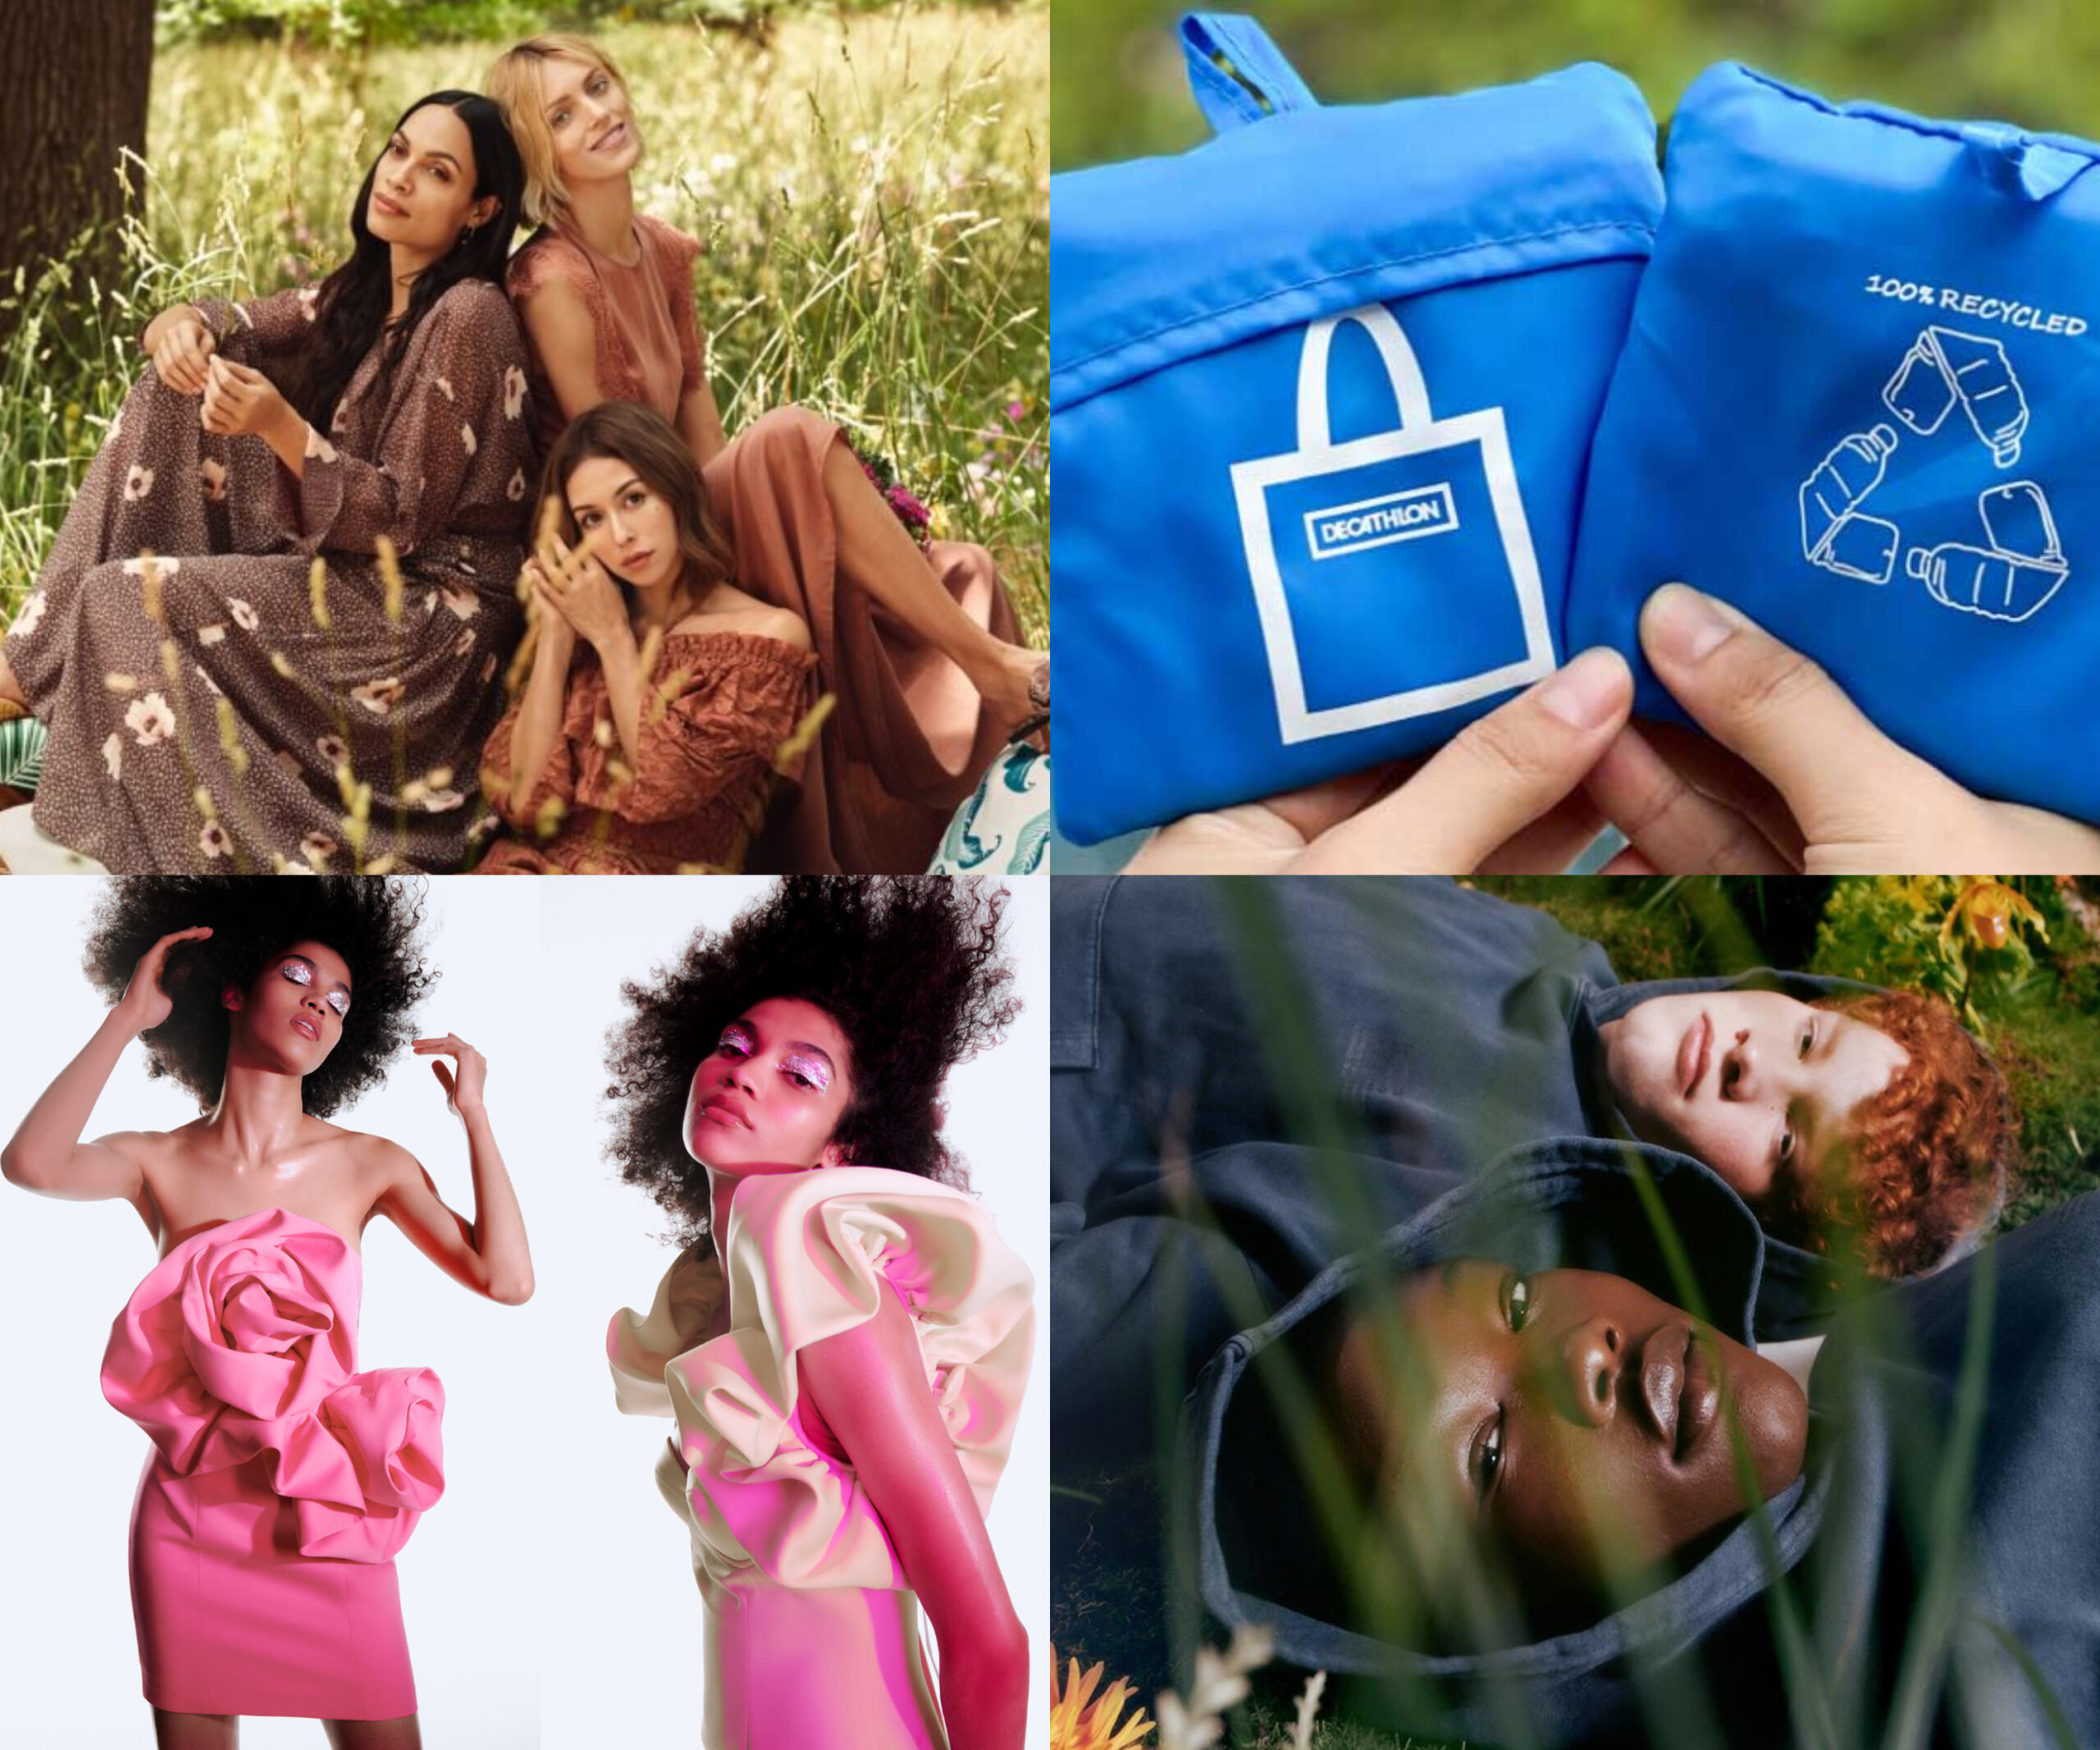  Greenwashing in the Fashion Industry: More Than Just a Shade of Green